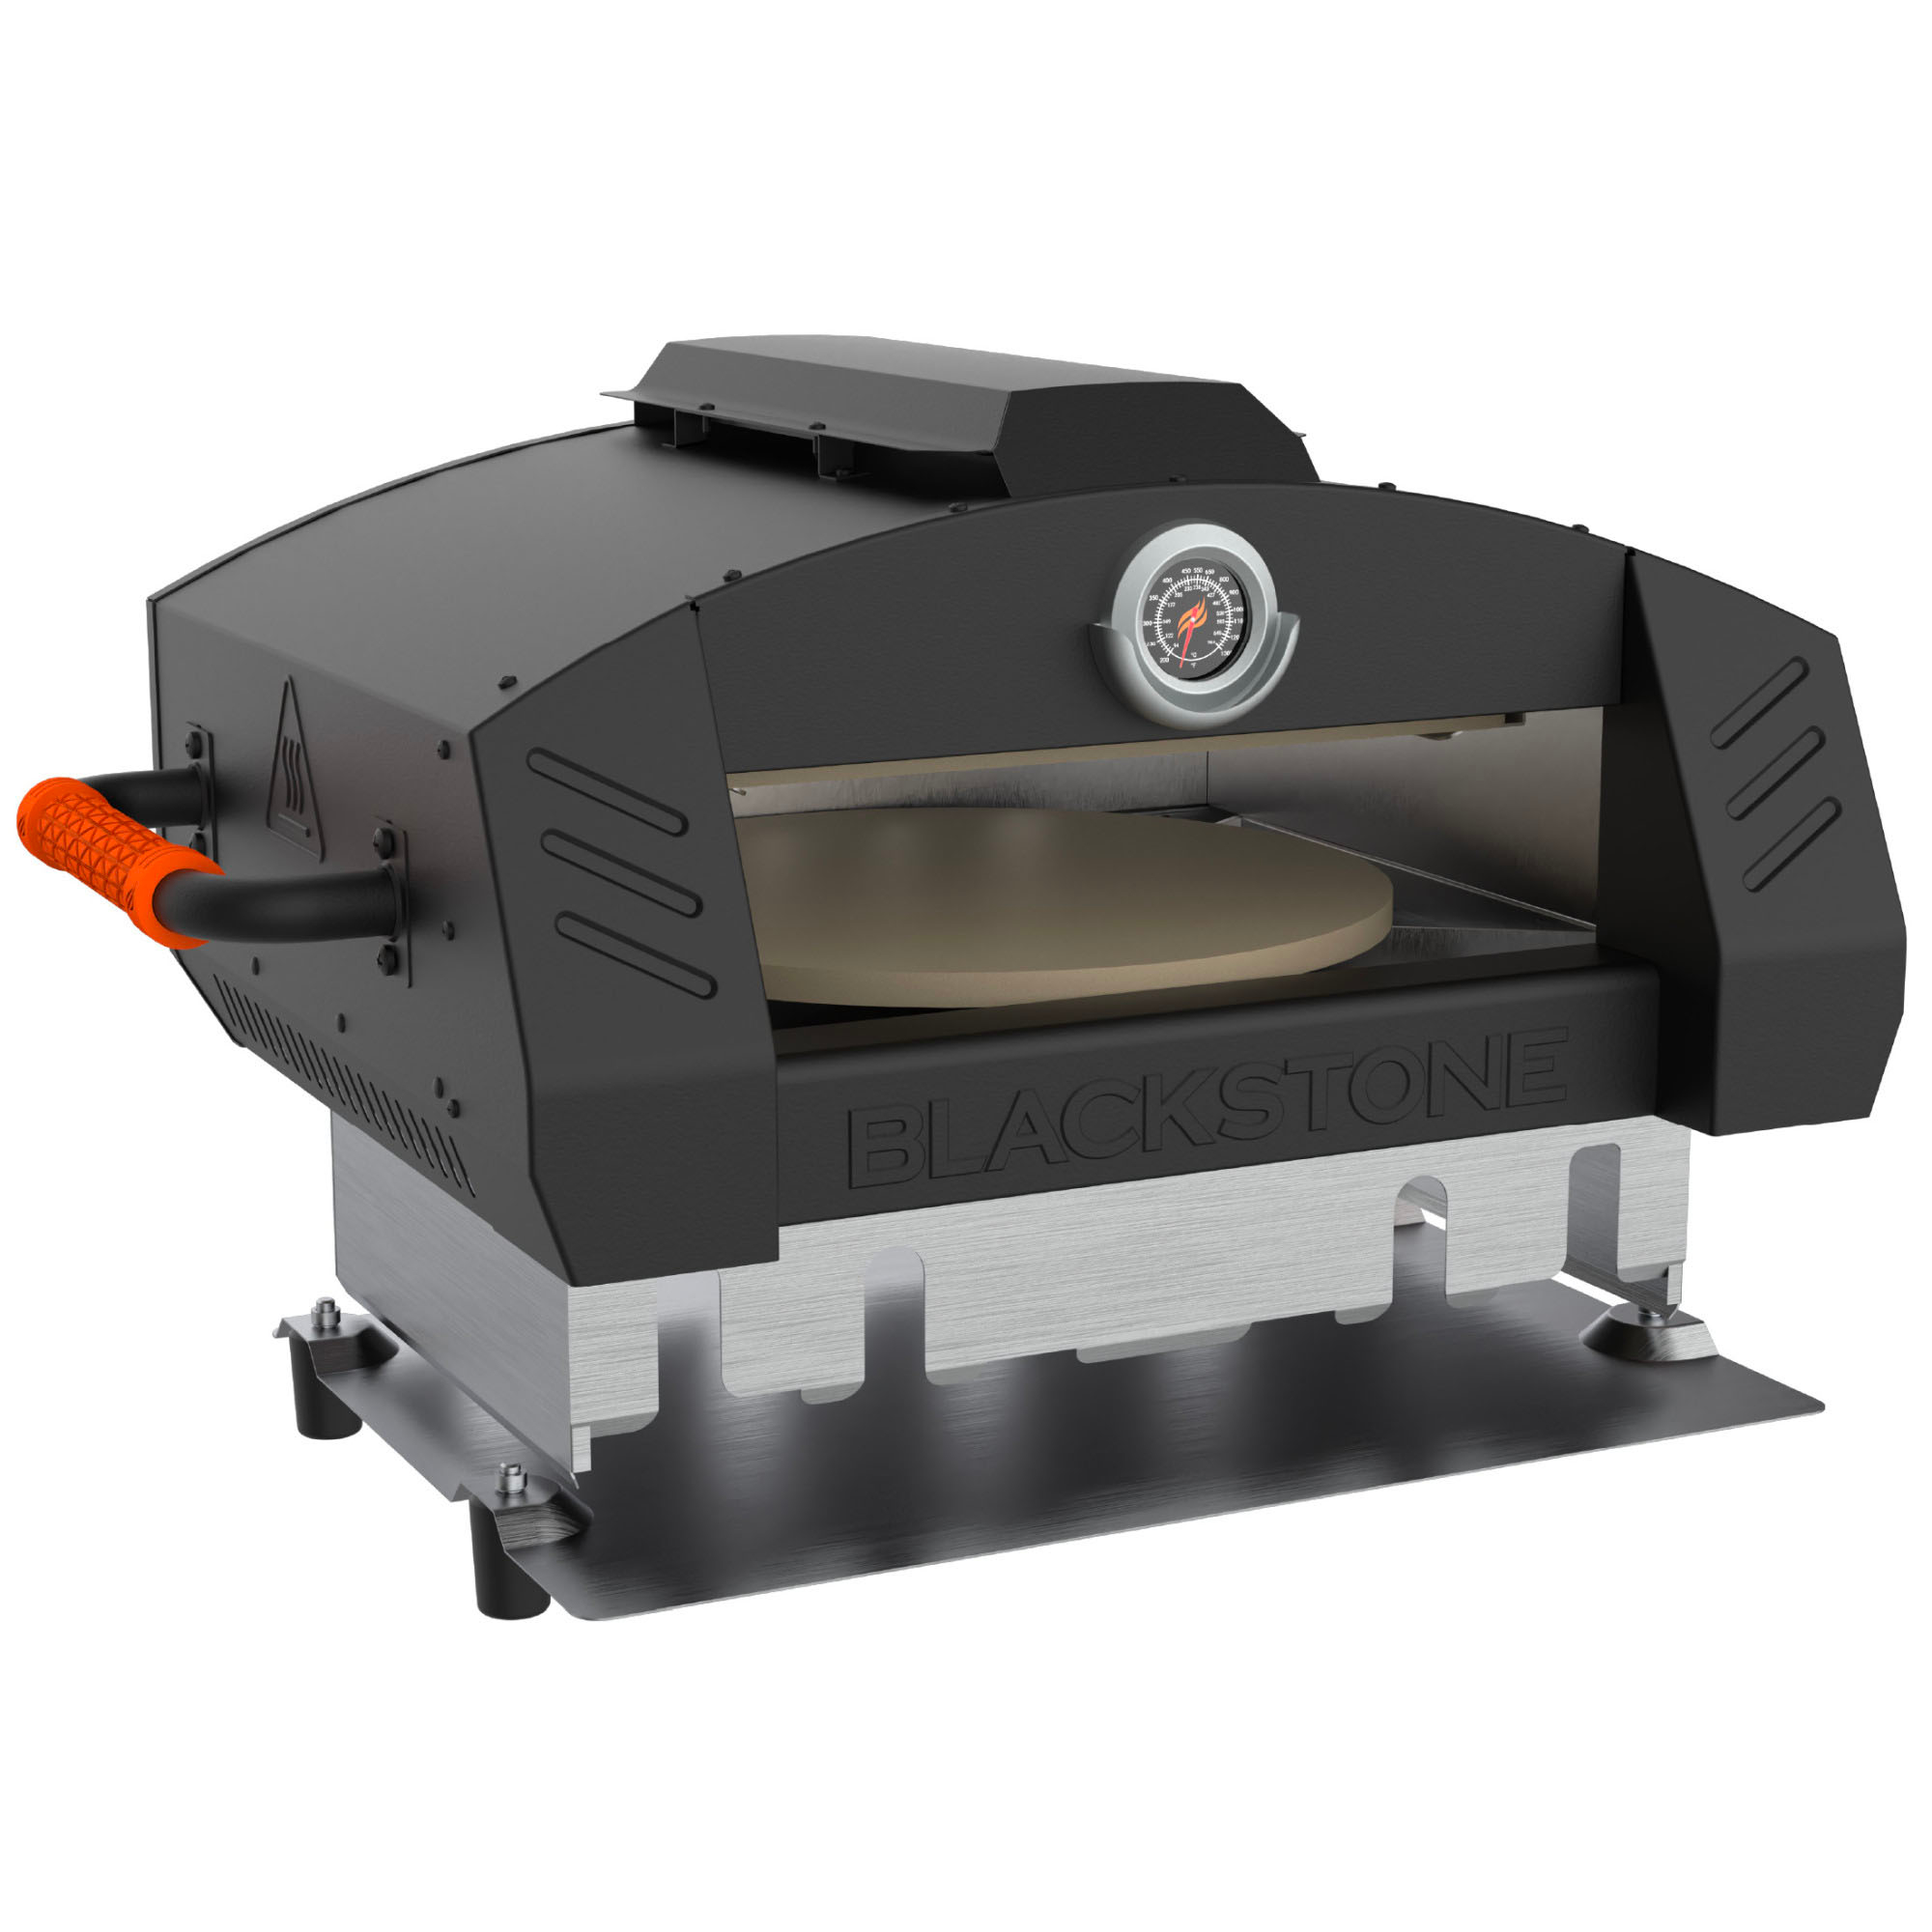 Angle View: Pizza Oven Conversion Kit for Blackstone 22-in. Griddles - Black